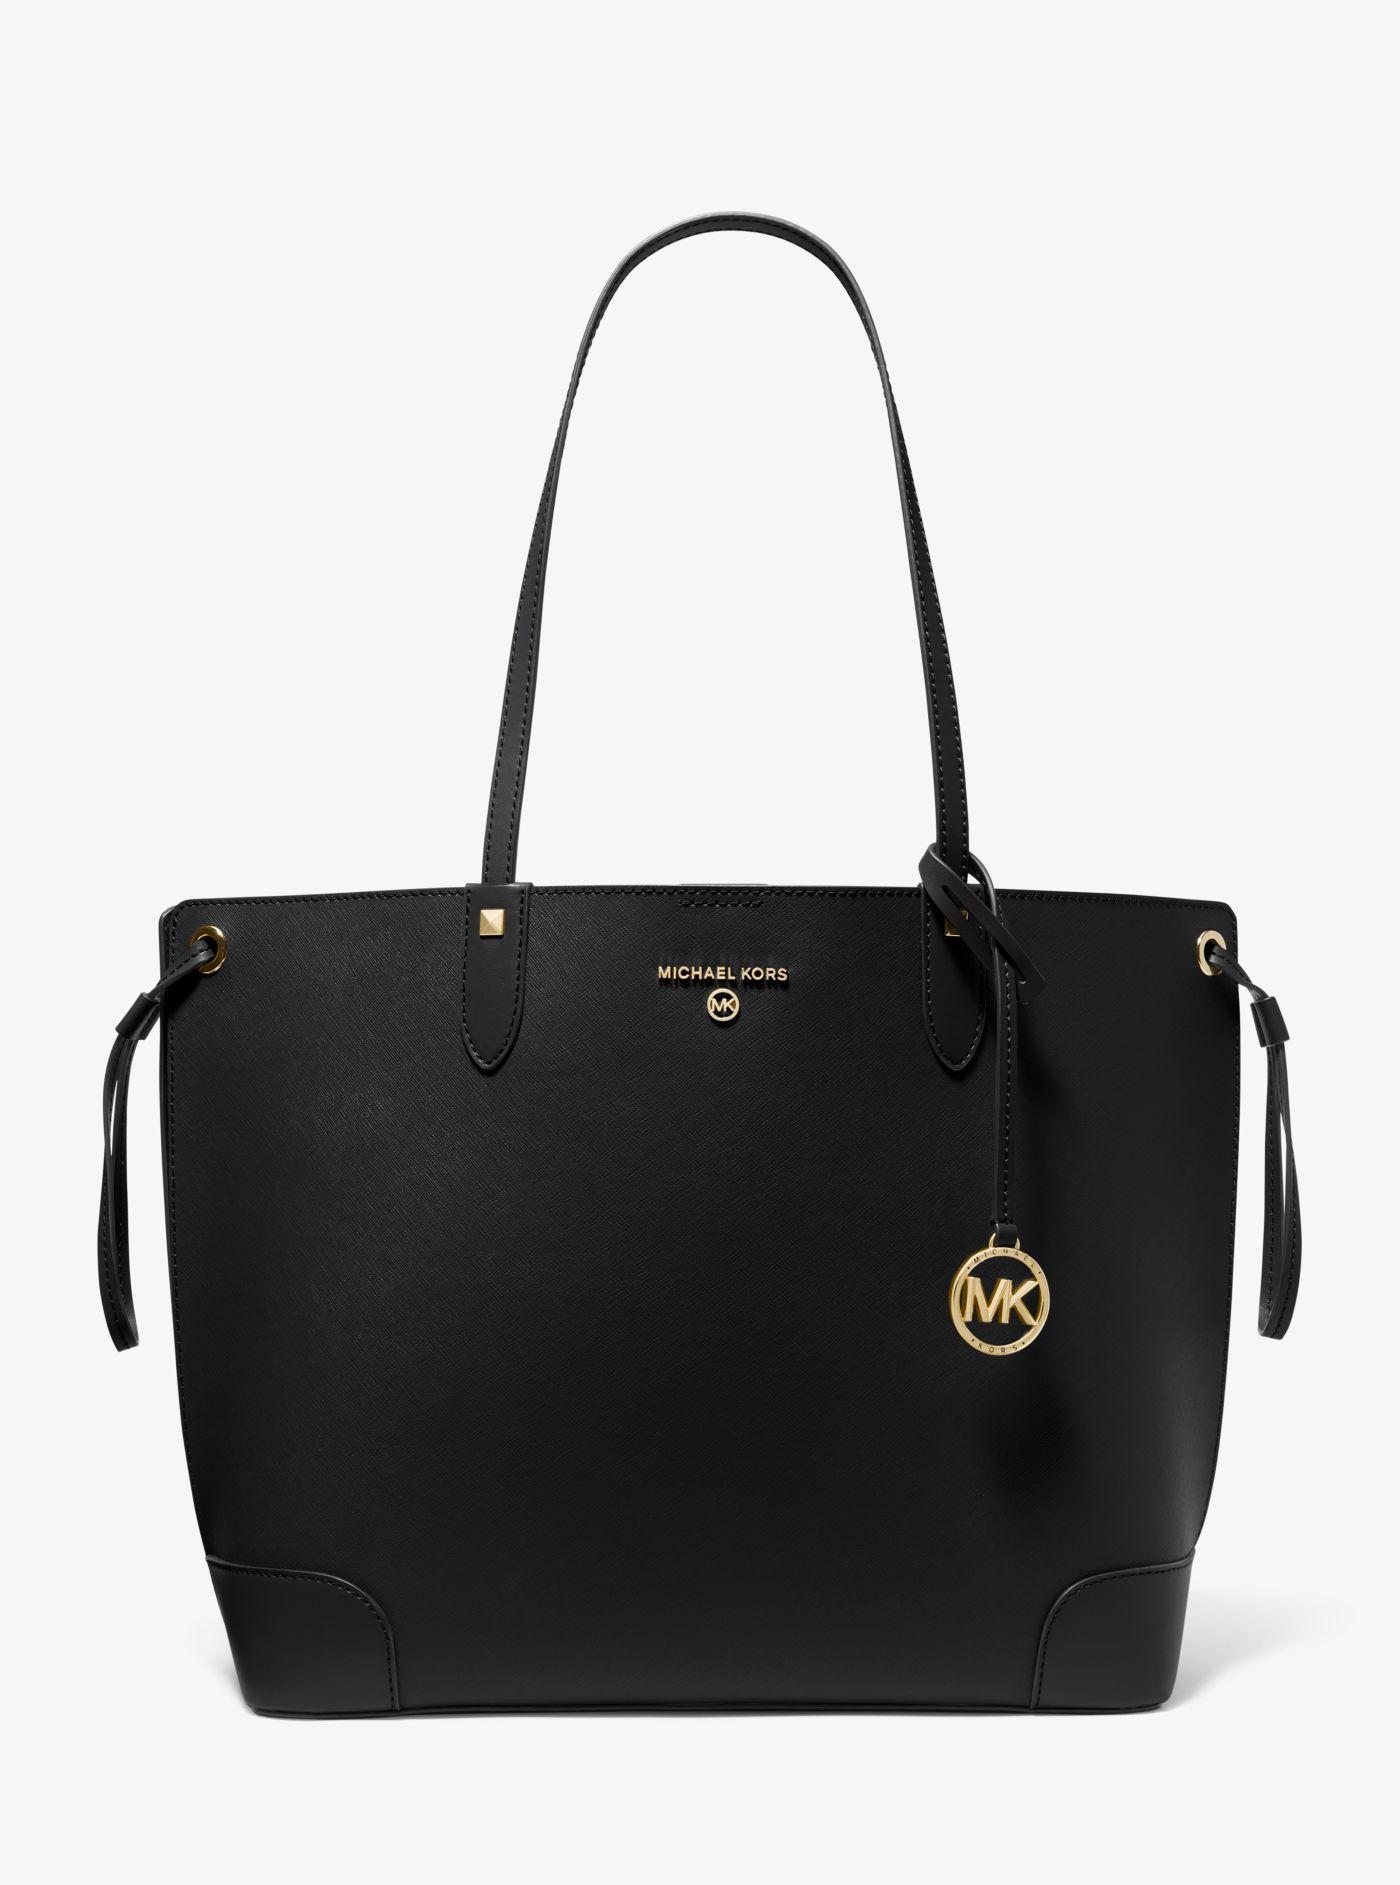 Michael Kors Edith Large Saffiano Leather Tote Bag in Black | Lyst